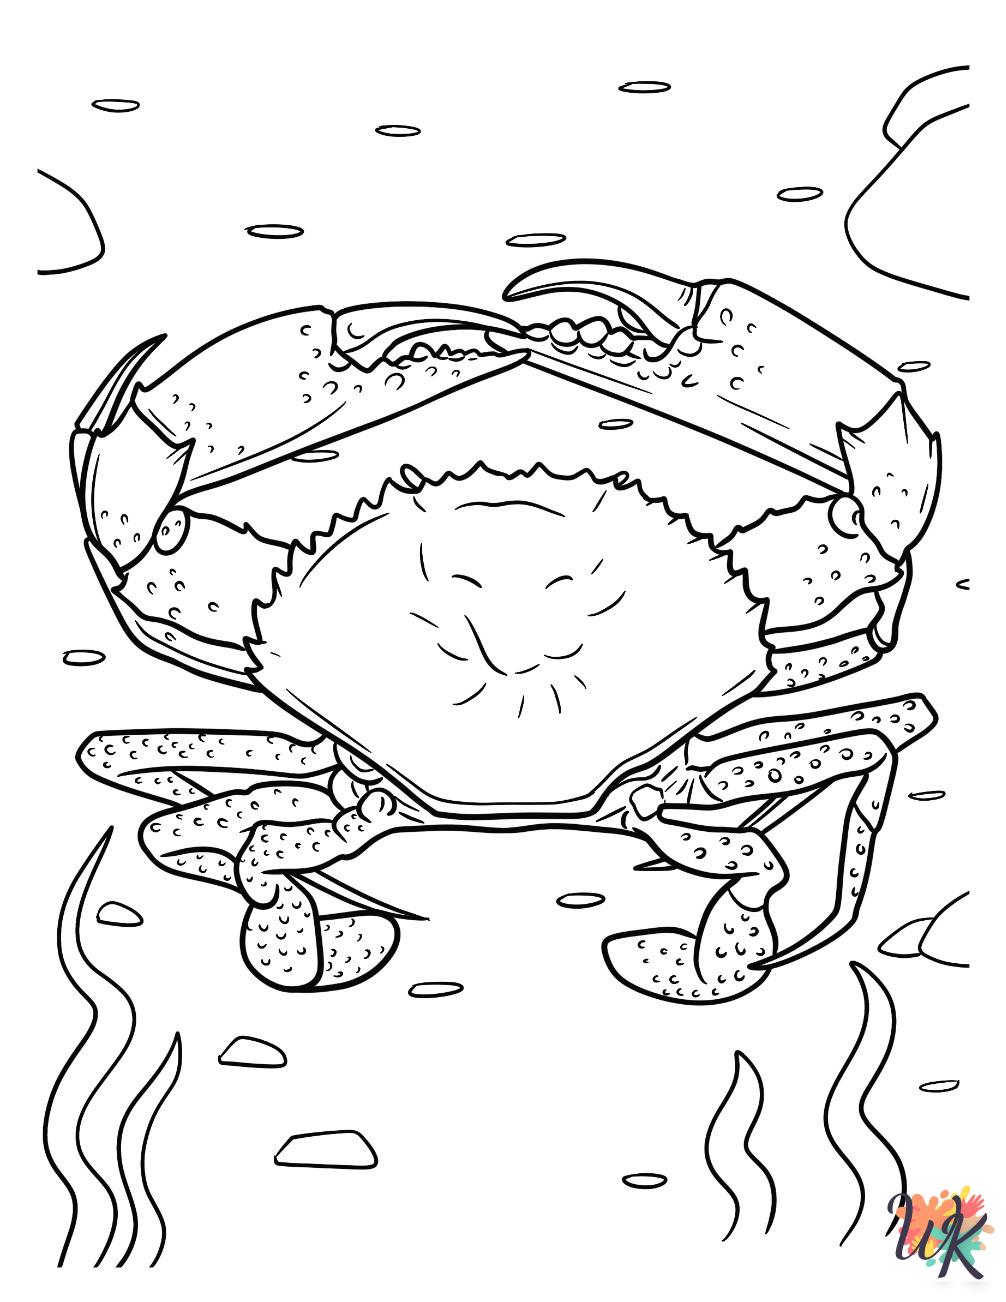 old-fashioned Crab coloring pages 1